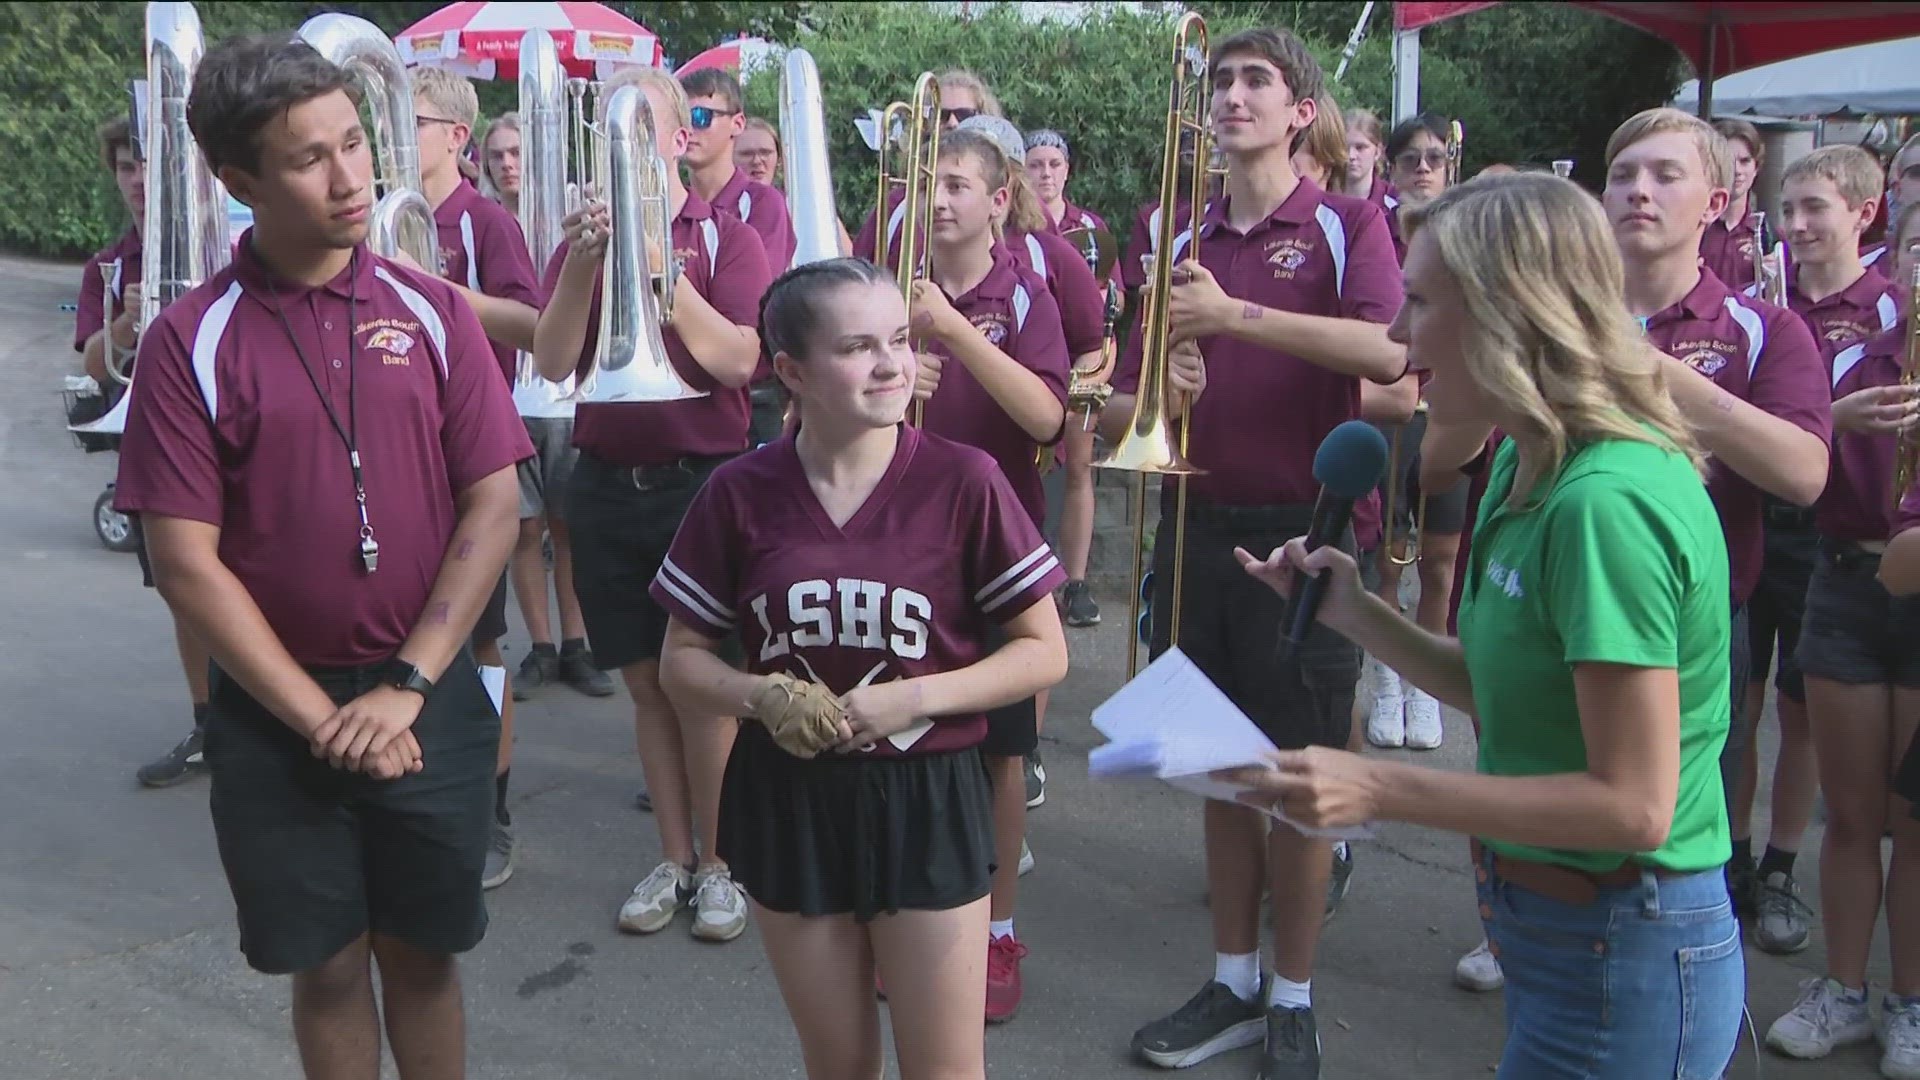 Lauren interviews co-band directors Chad Bieniek and Nick Castonguay from the Lakeville South High School Marching Band.